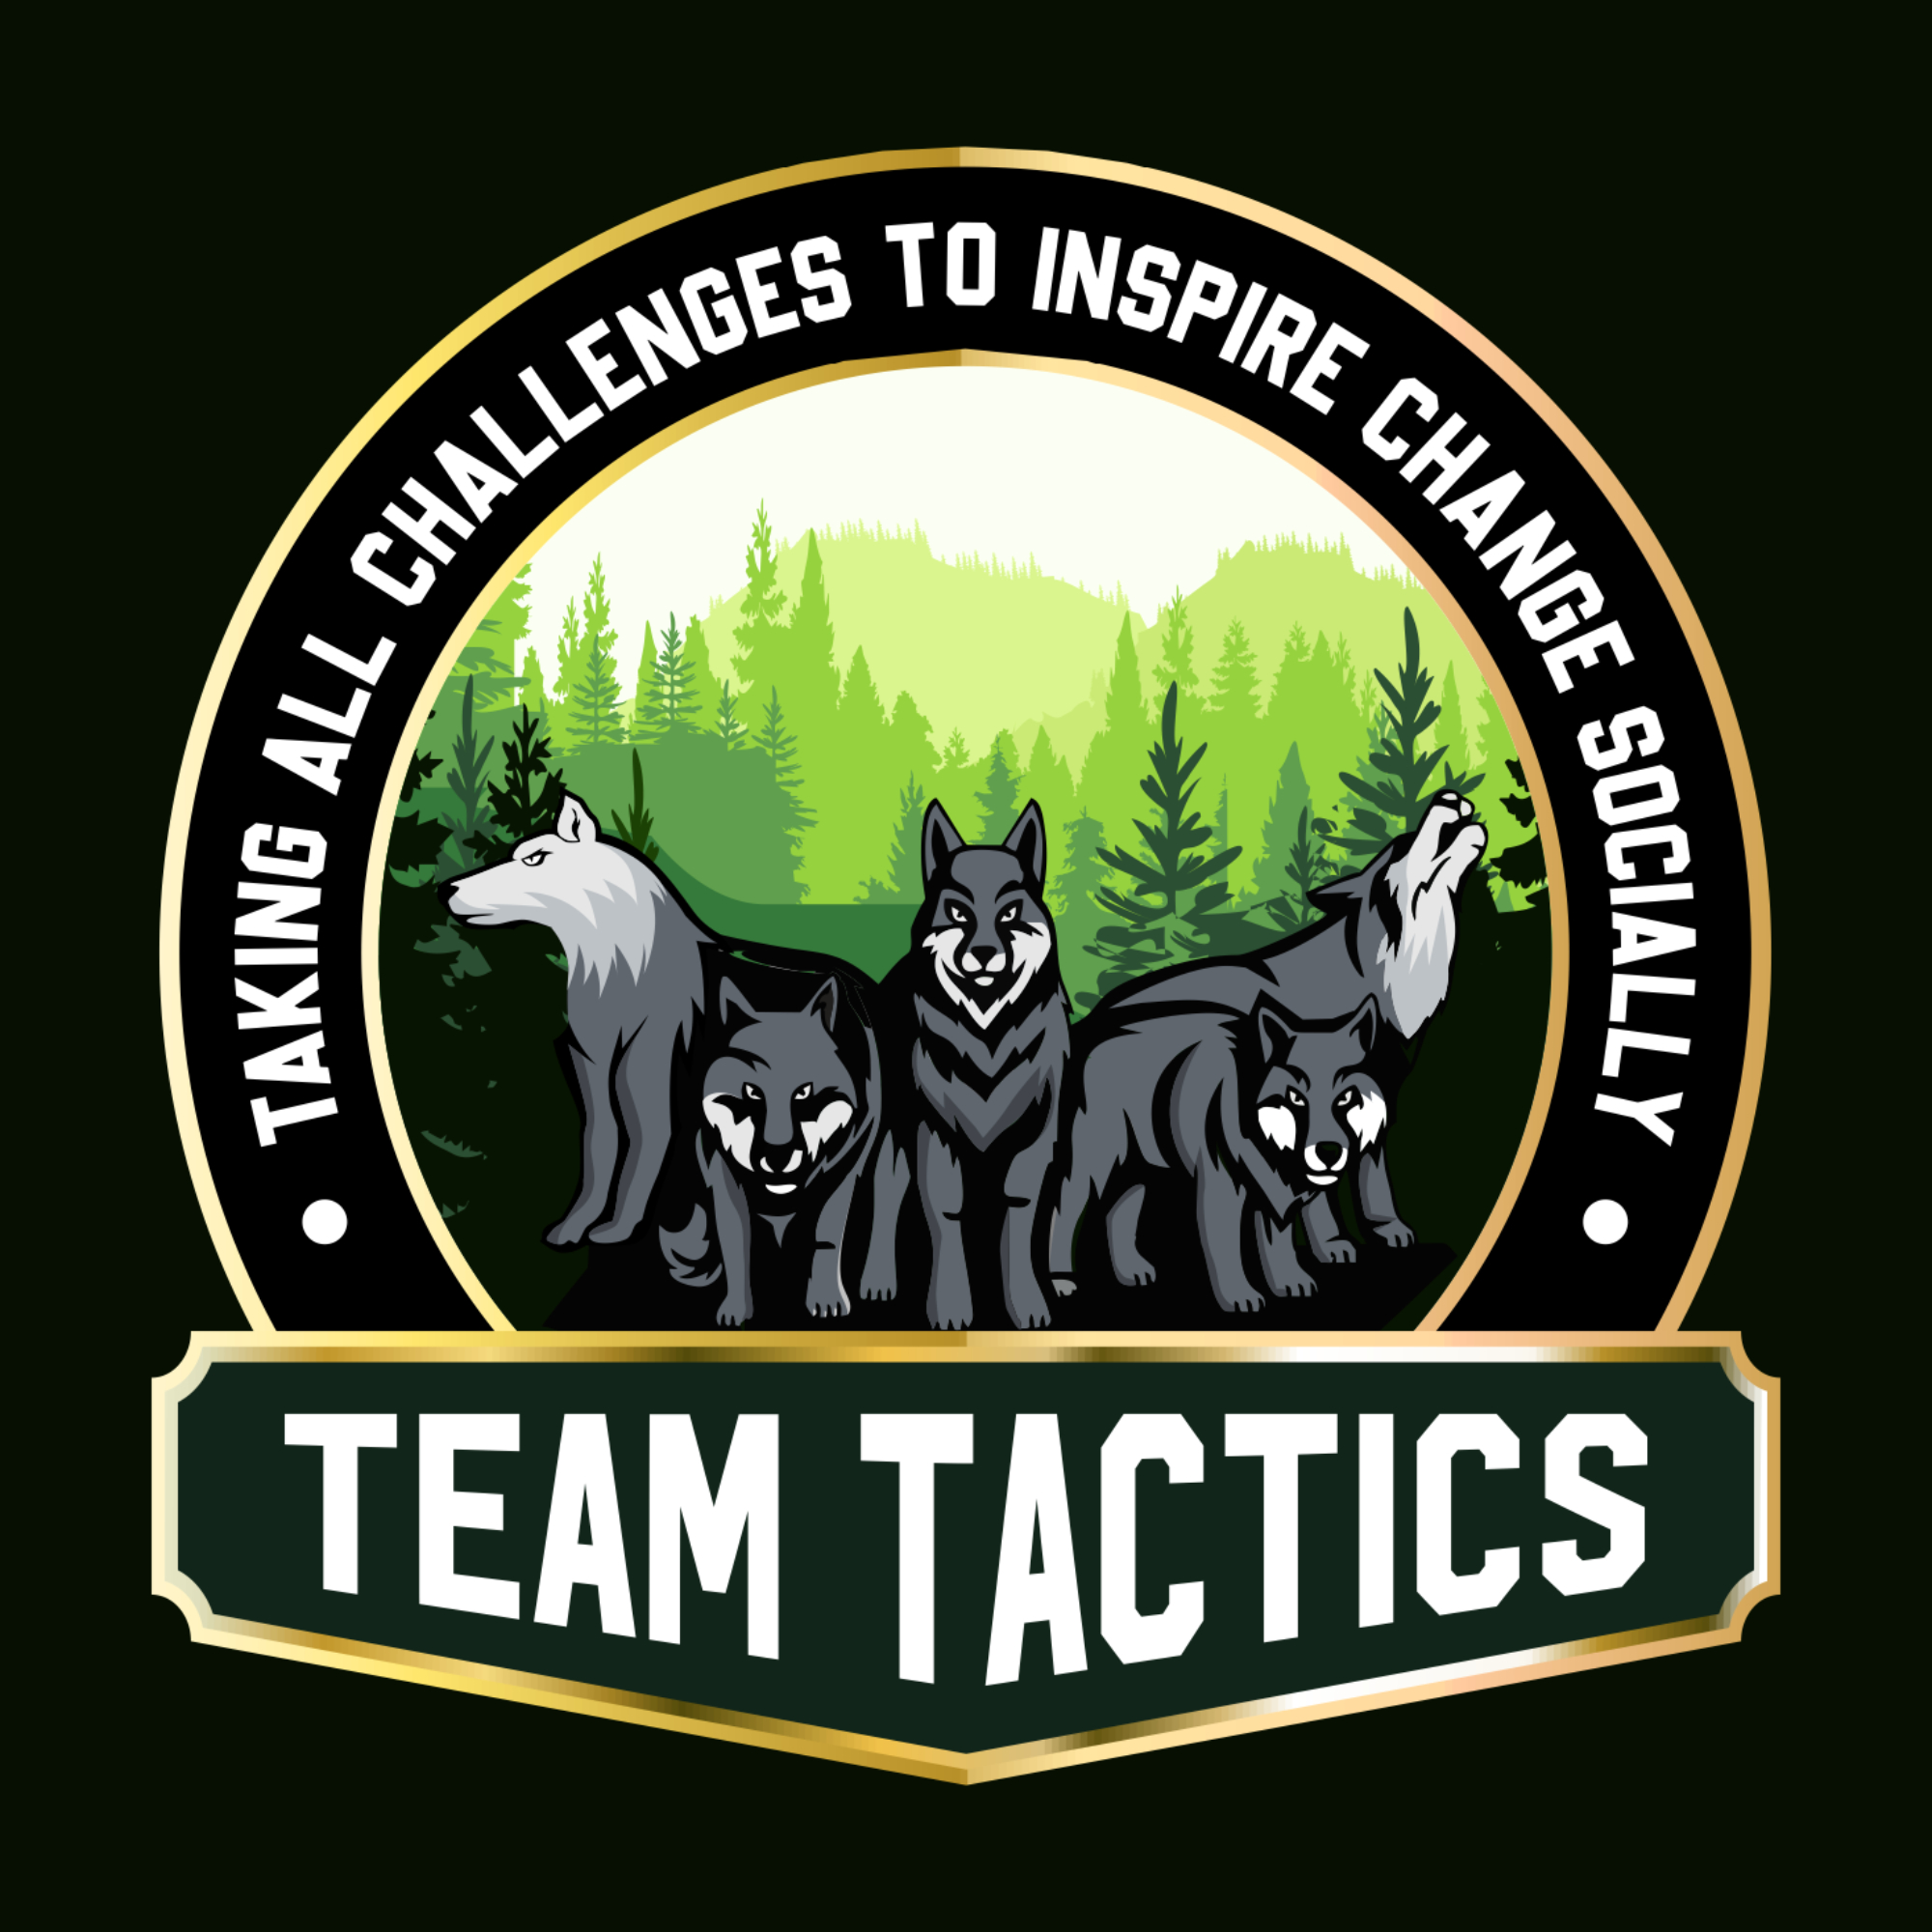 The official logo of Team Tactics